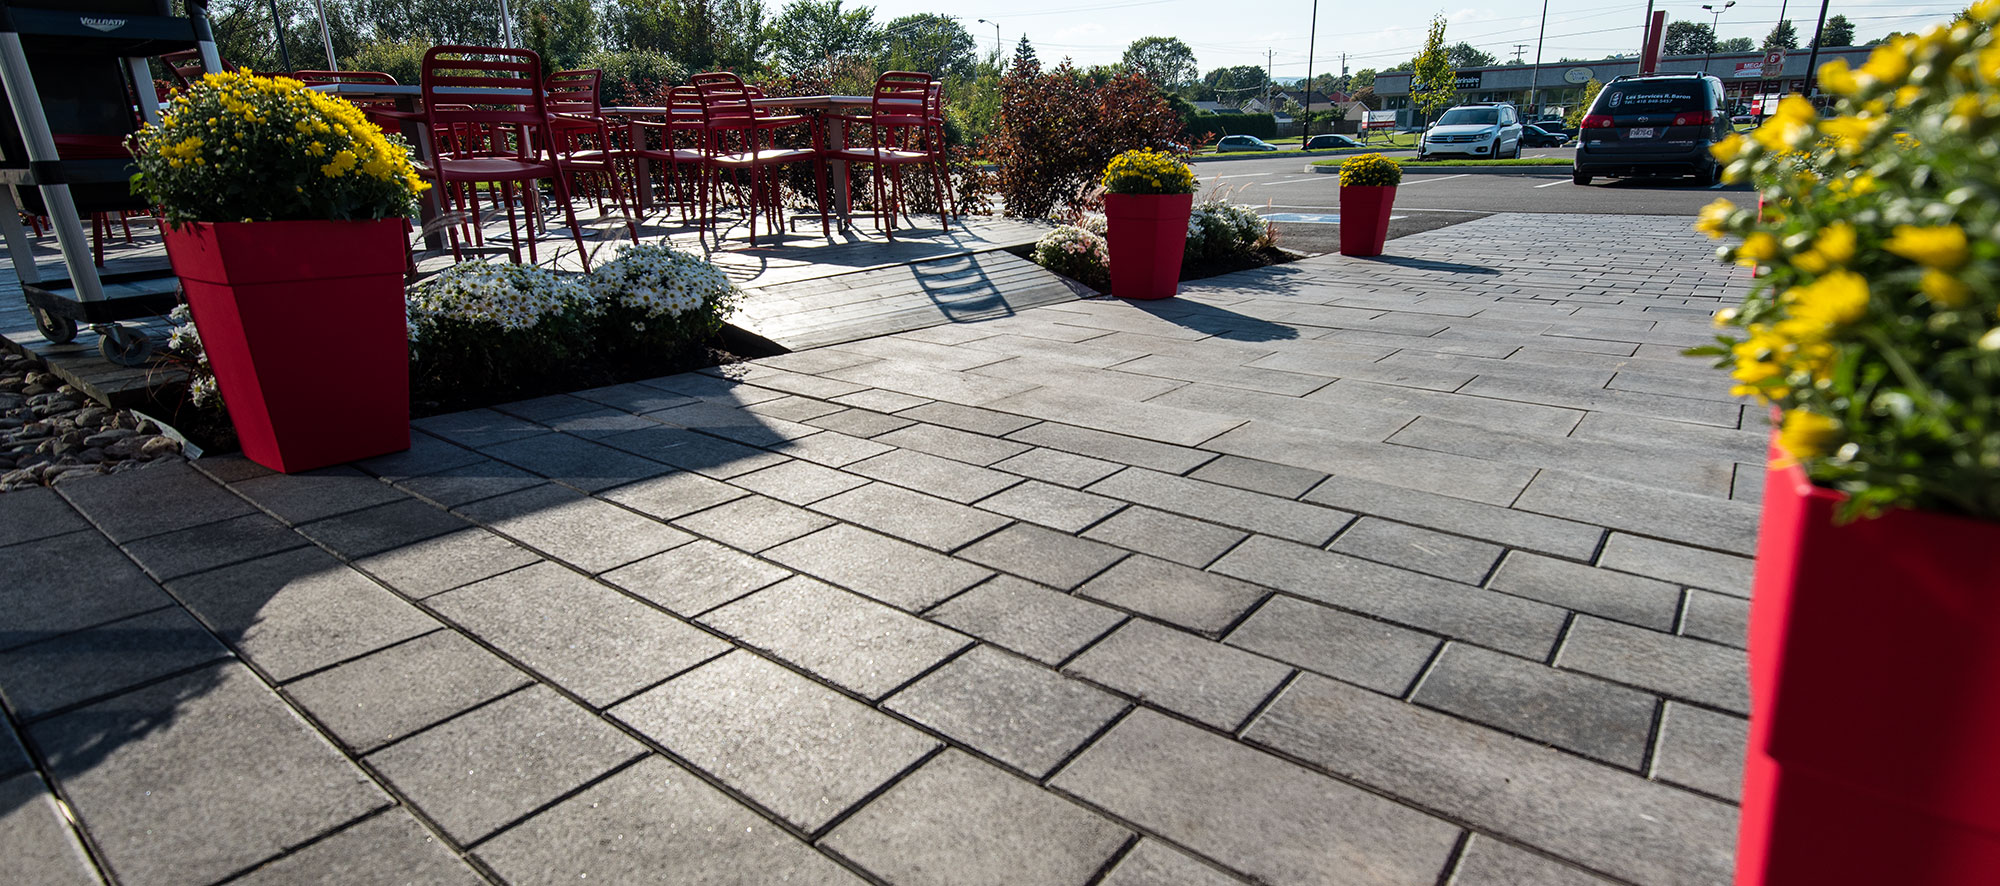 Rectangular Artline pavers with a mottled Umbriano finish create a path that leads to a parking lot, past a seating area and landscaping.